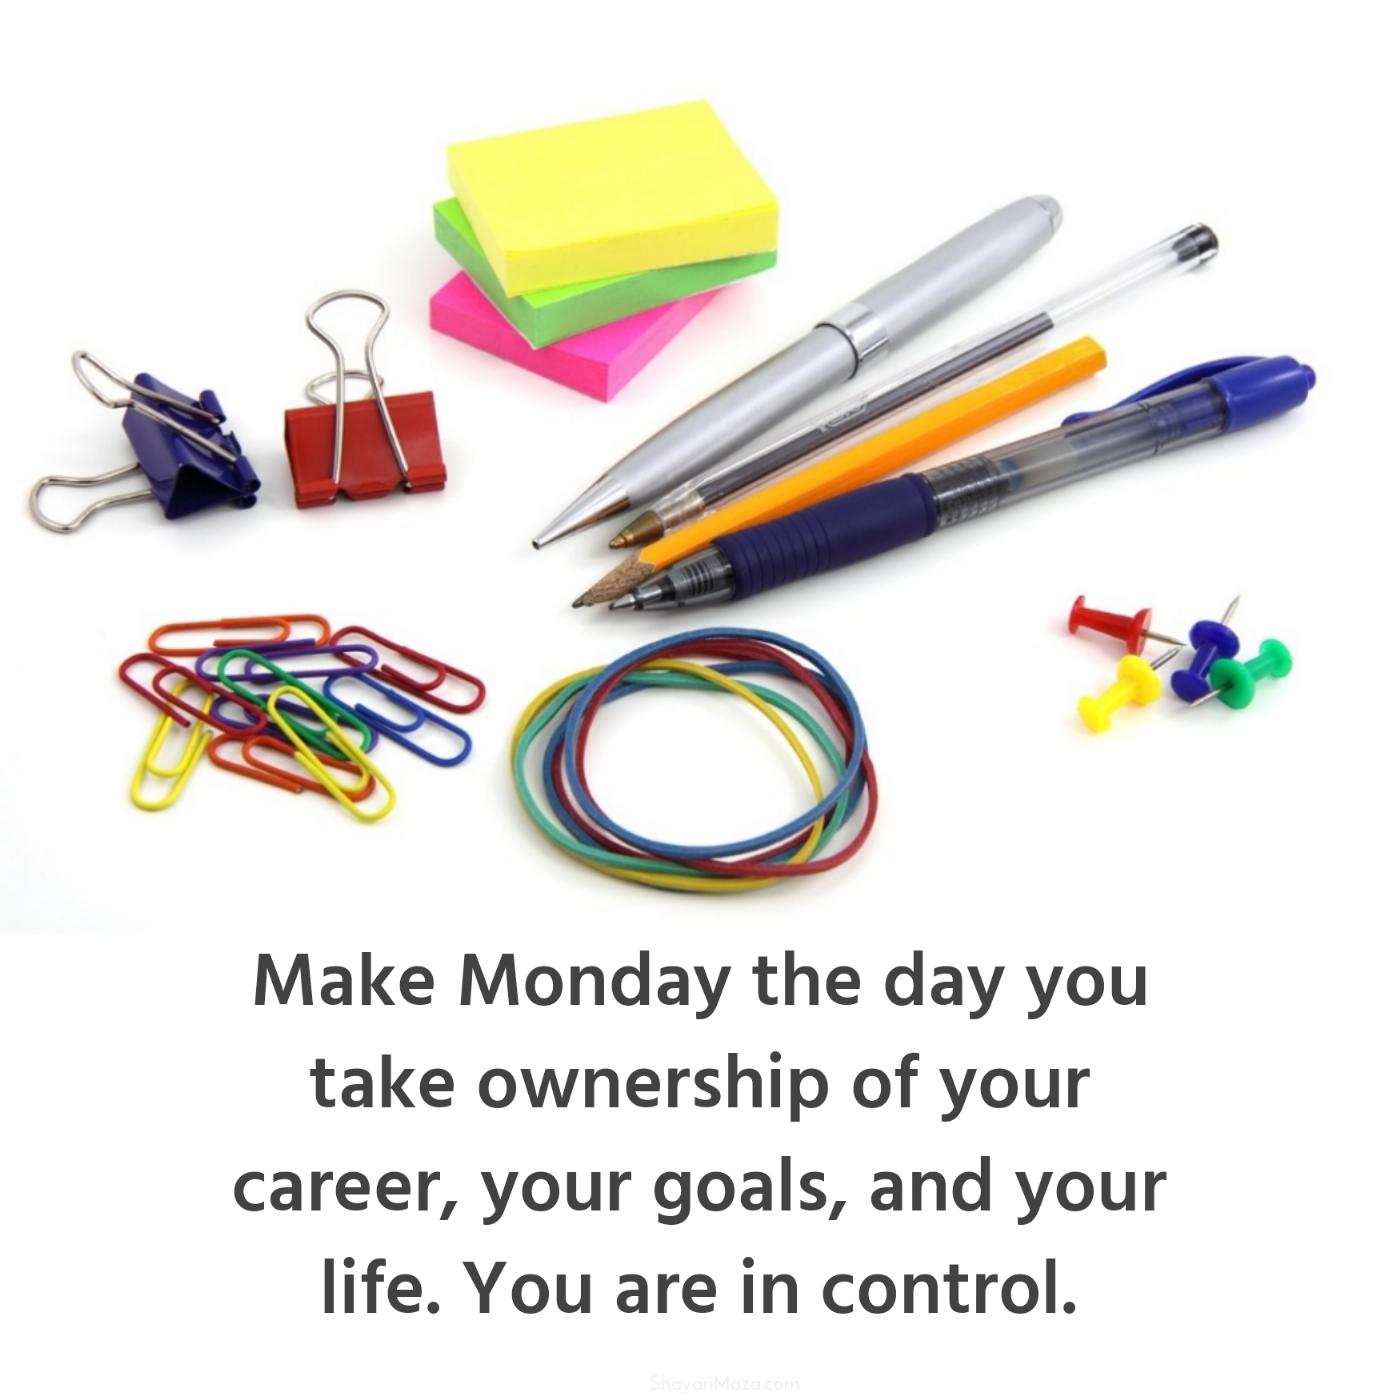 Make Monday the day you take ownership of your career